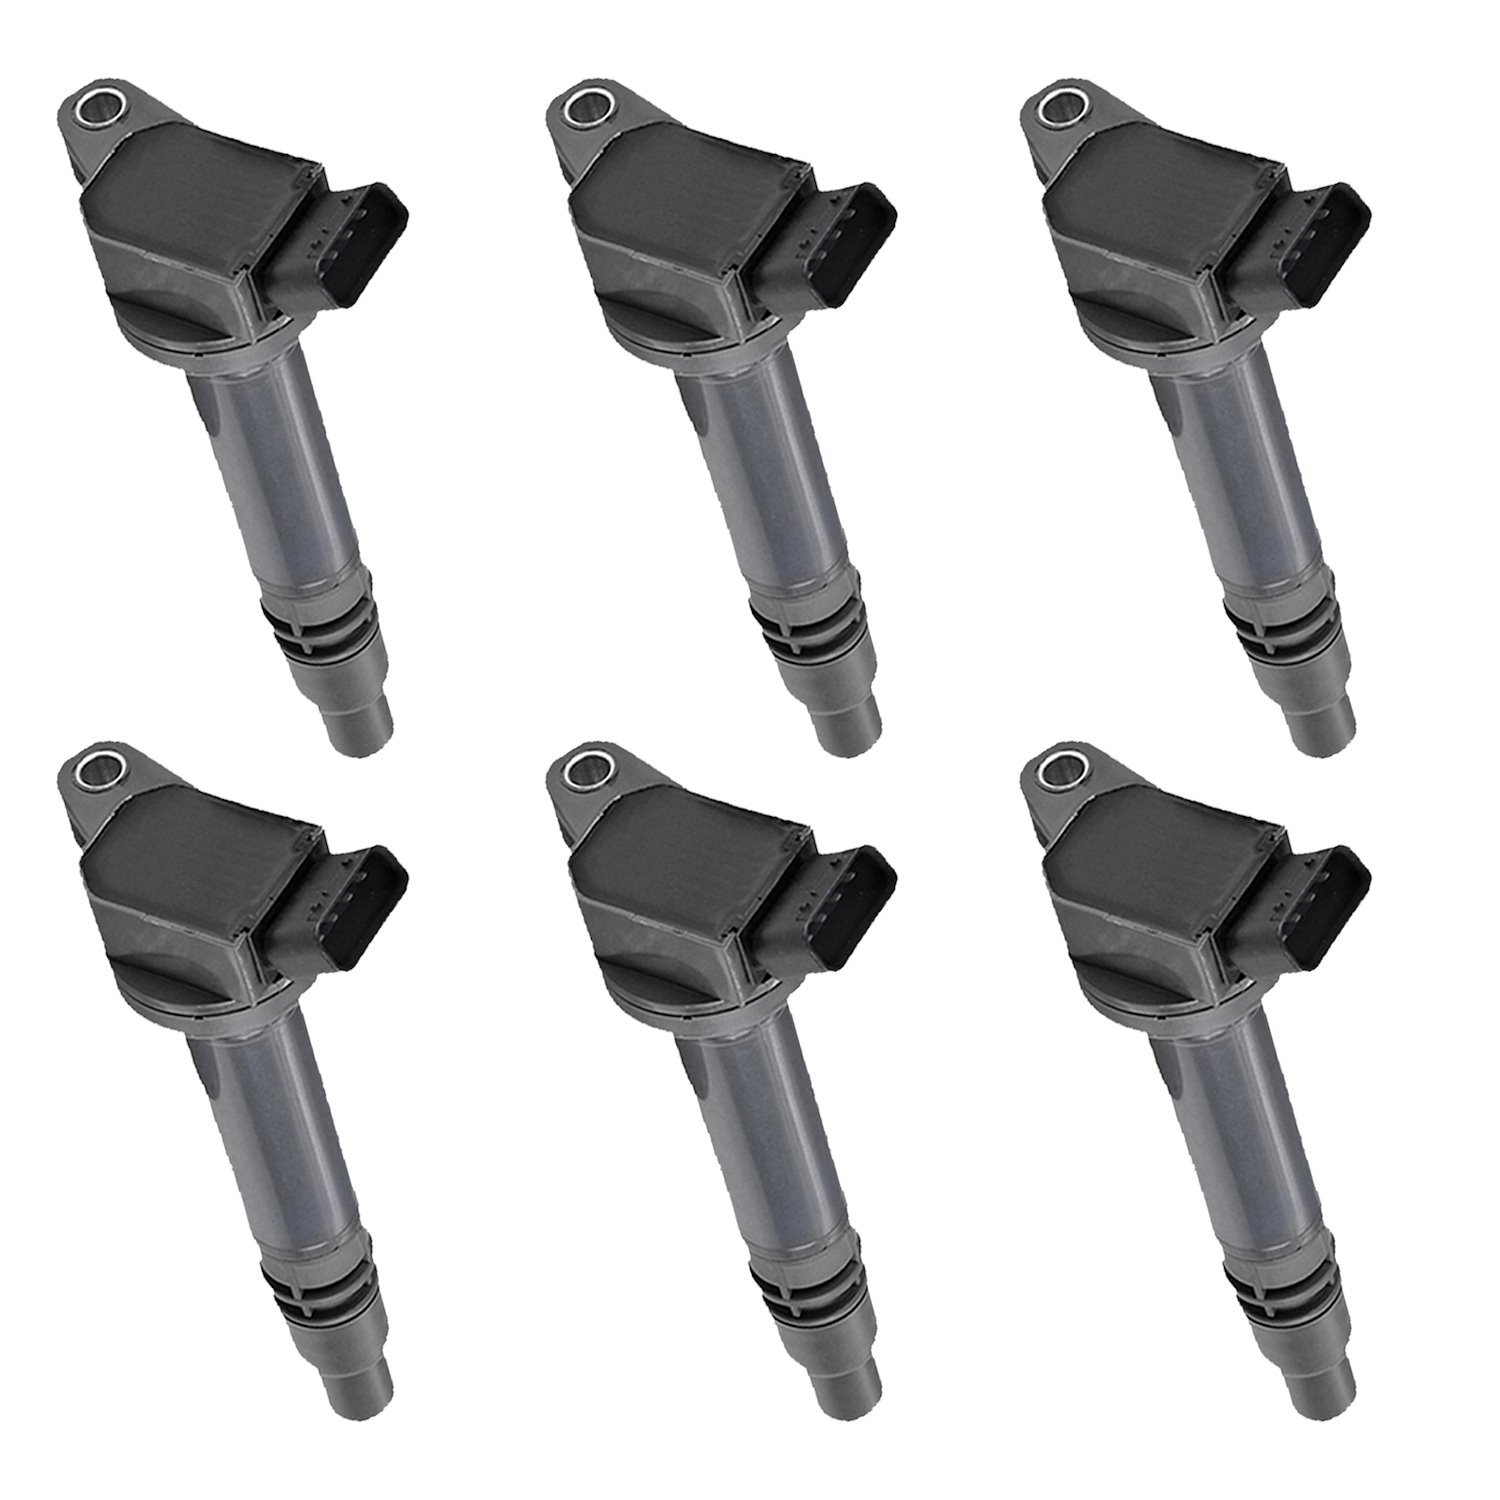 OE Replacement Ignition Coils for Lexus GS350 IS350 LS460 RC300